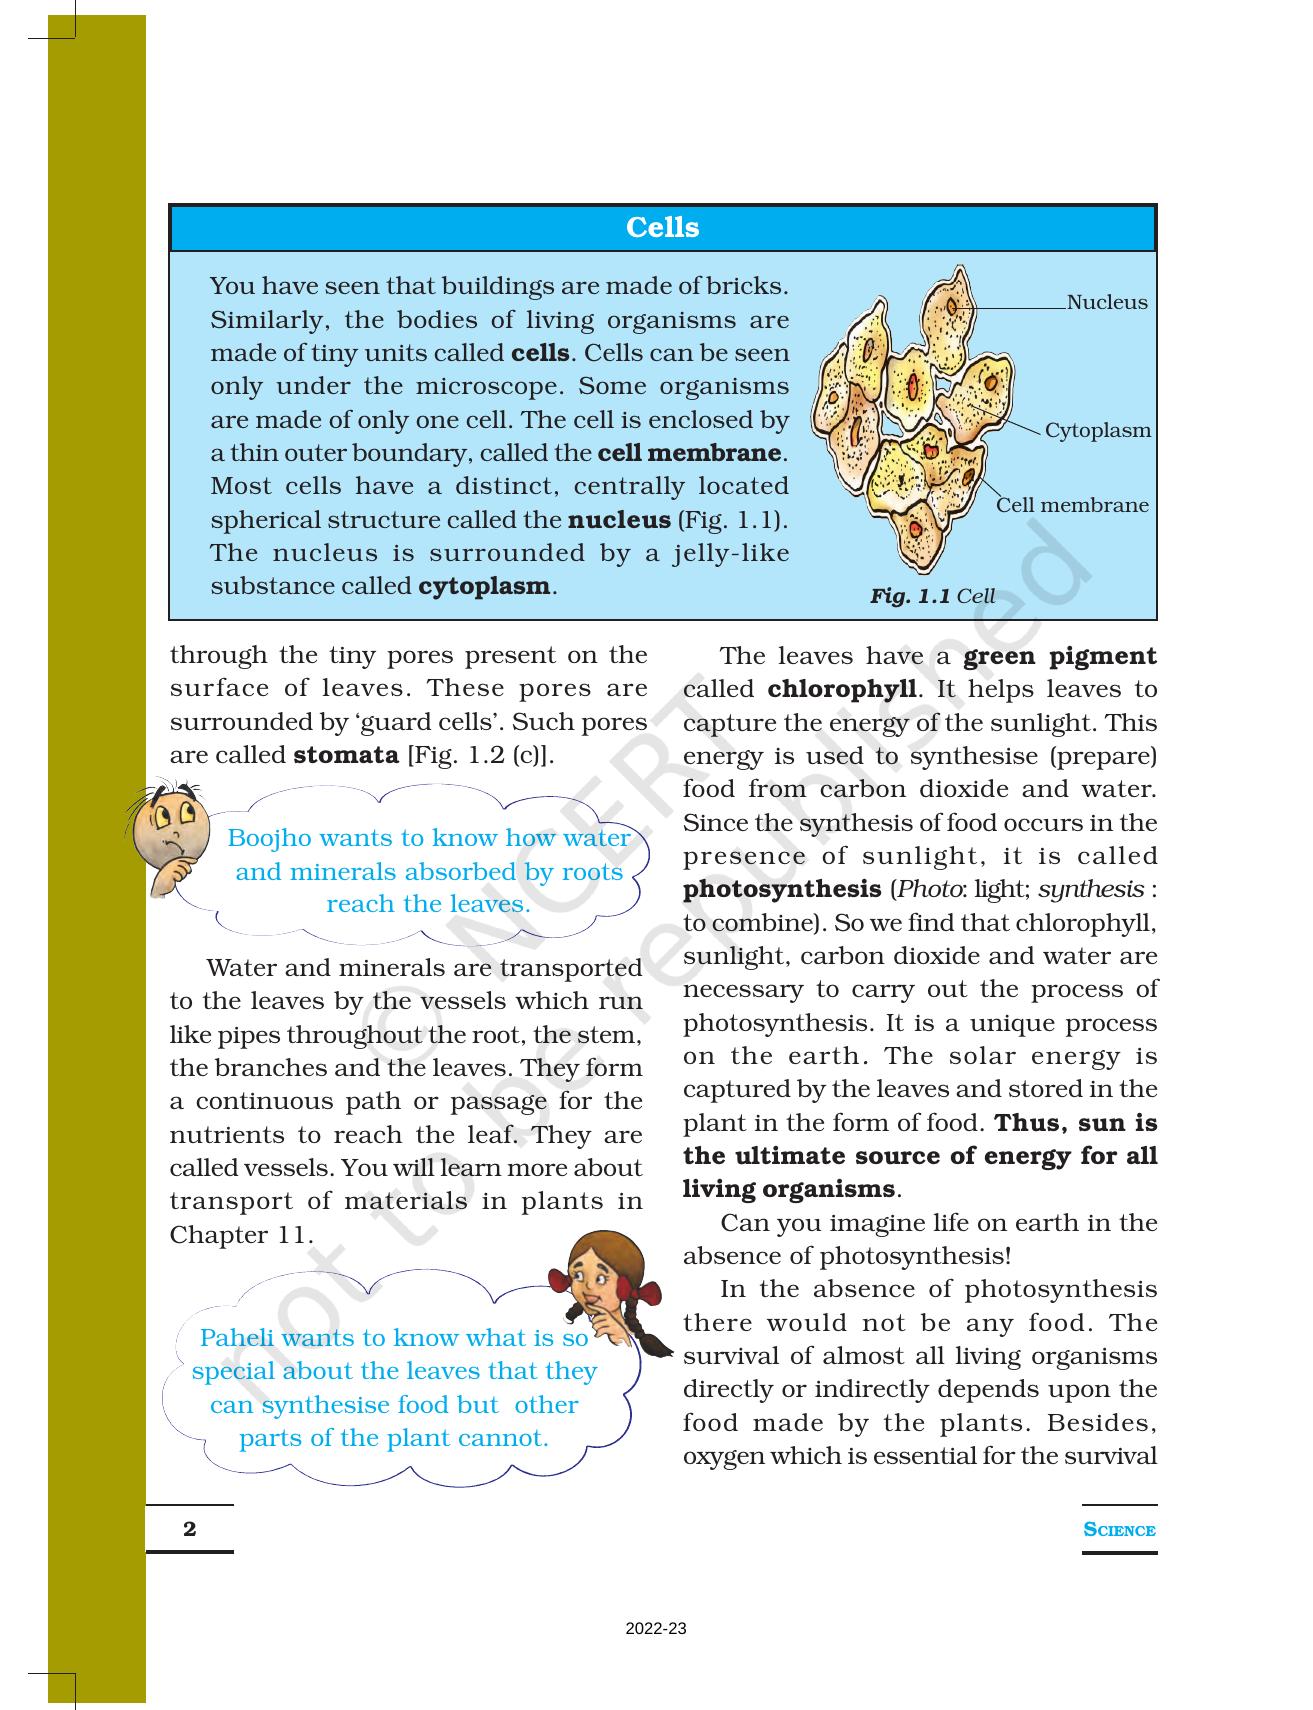 NCERT Book for Class 7 Science: Chapter 1-Nutrition in Plants - Page 2